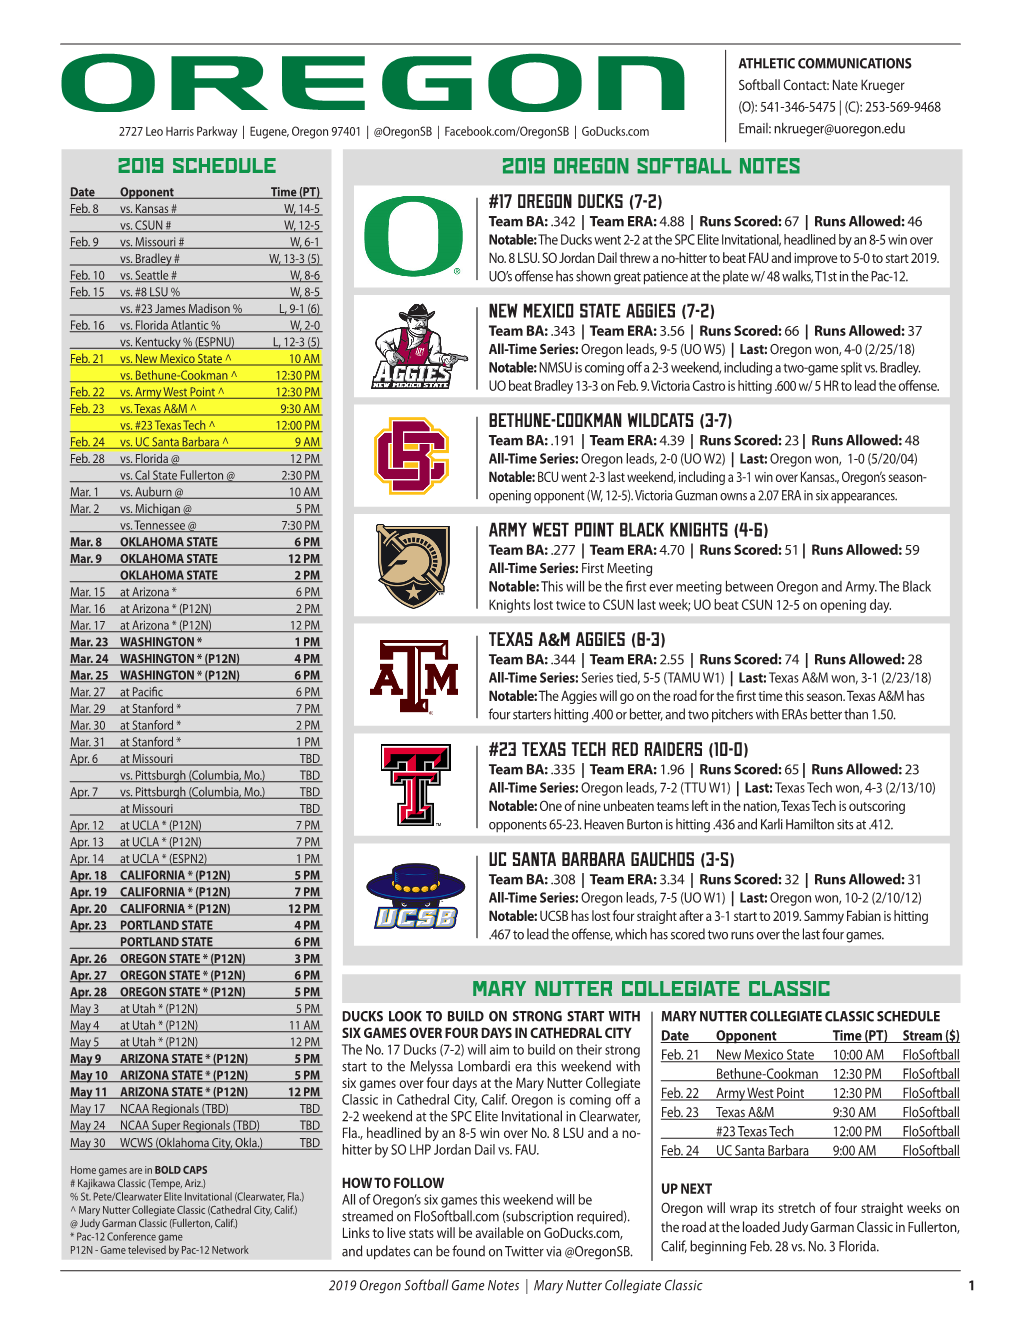 2019 Oregon Softball Notes 2019 SCHEDULE MARY NUTTER COLLEGIATE Classic